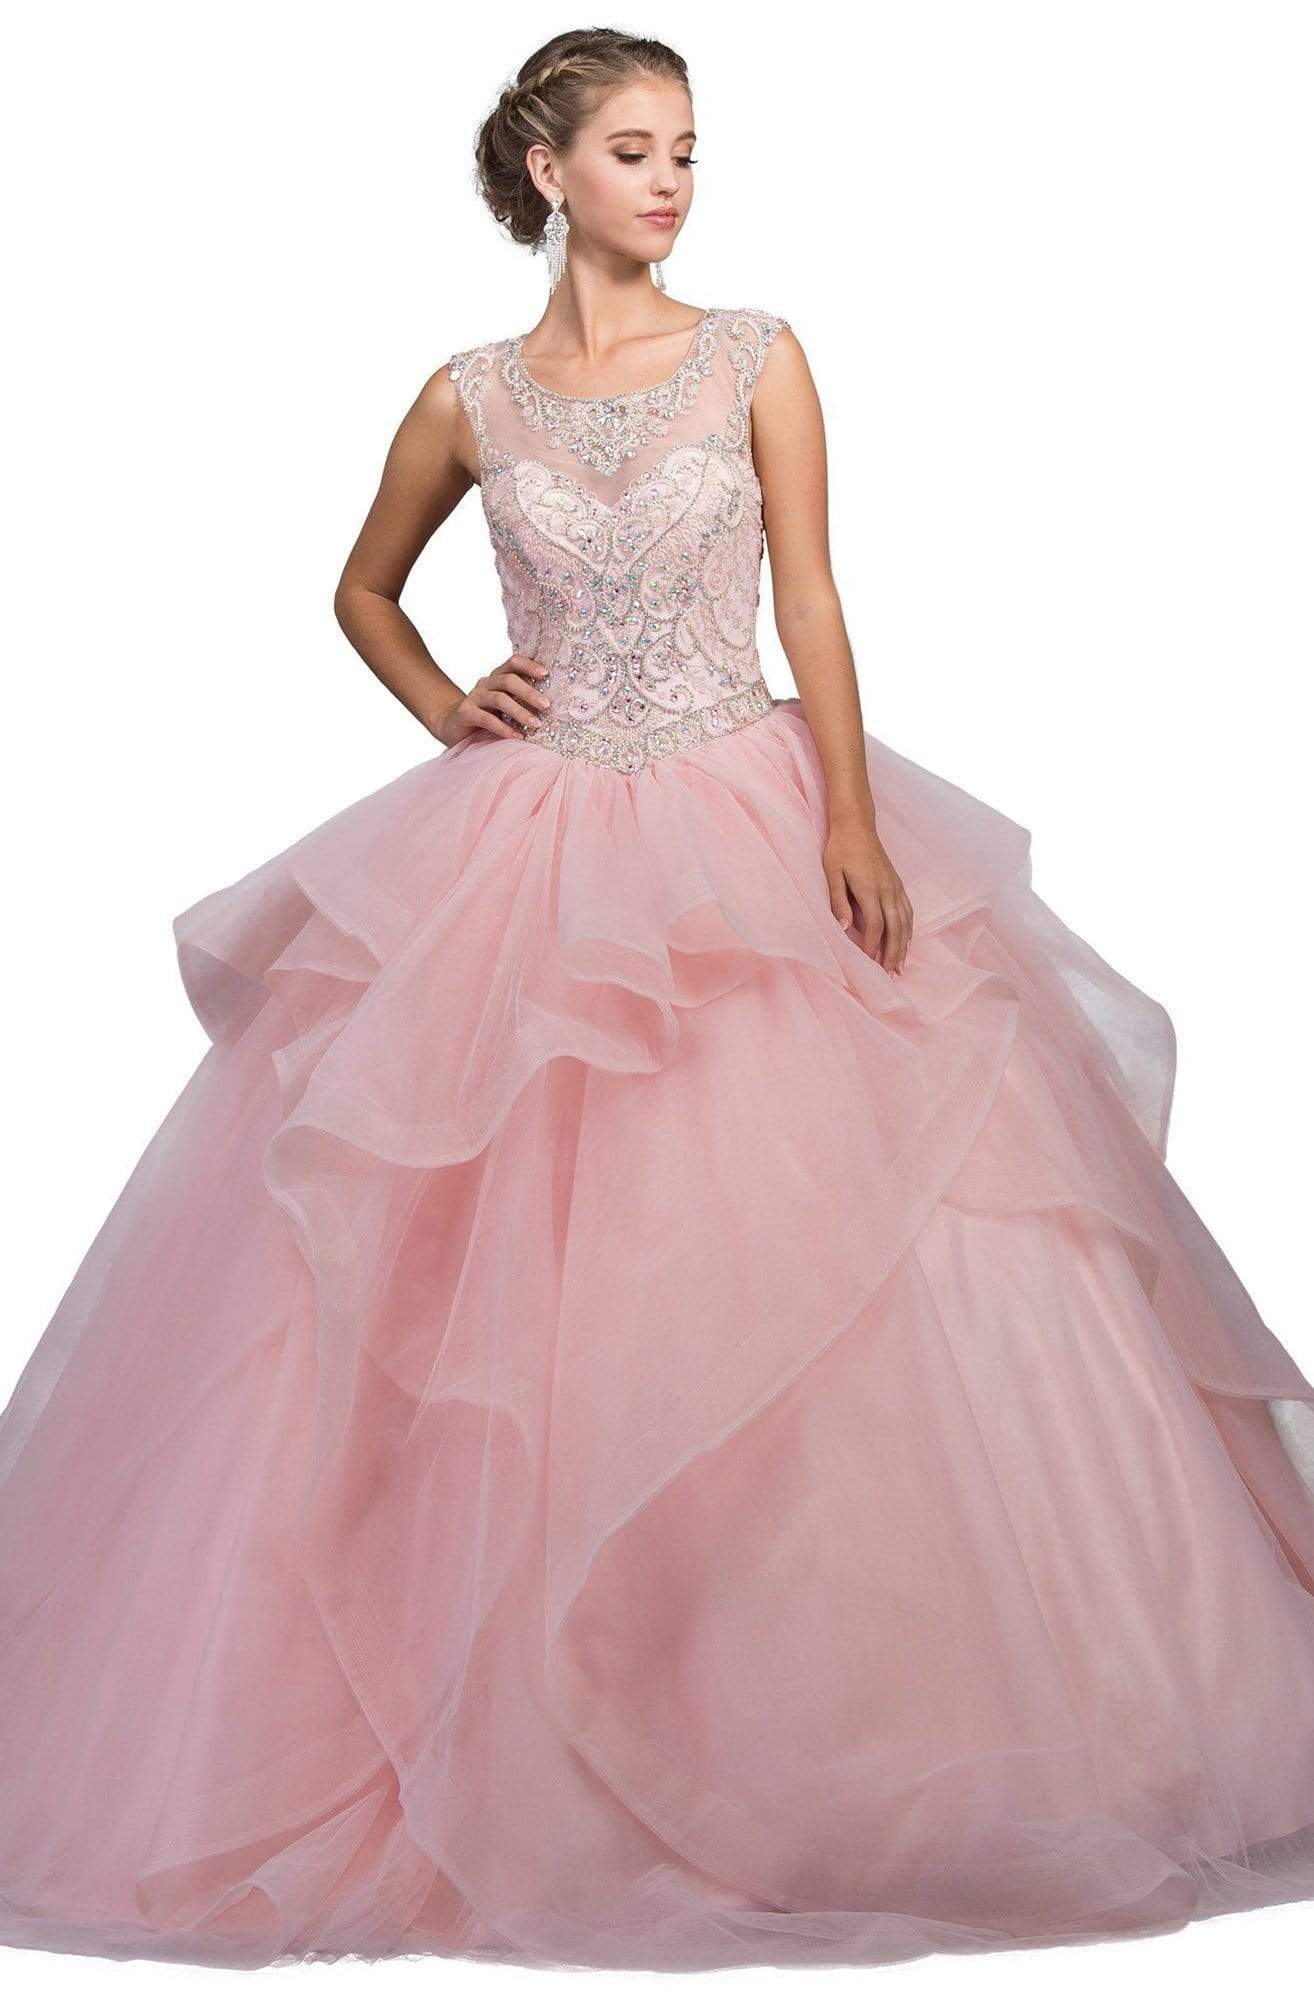 Dancing Queen - 1198 Cap Sleeve Jeweled Embroidery Ballgown
